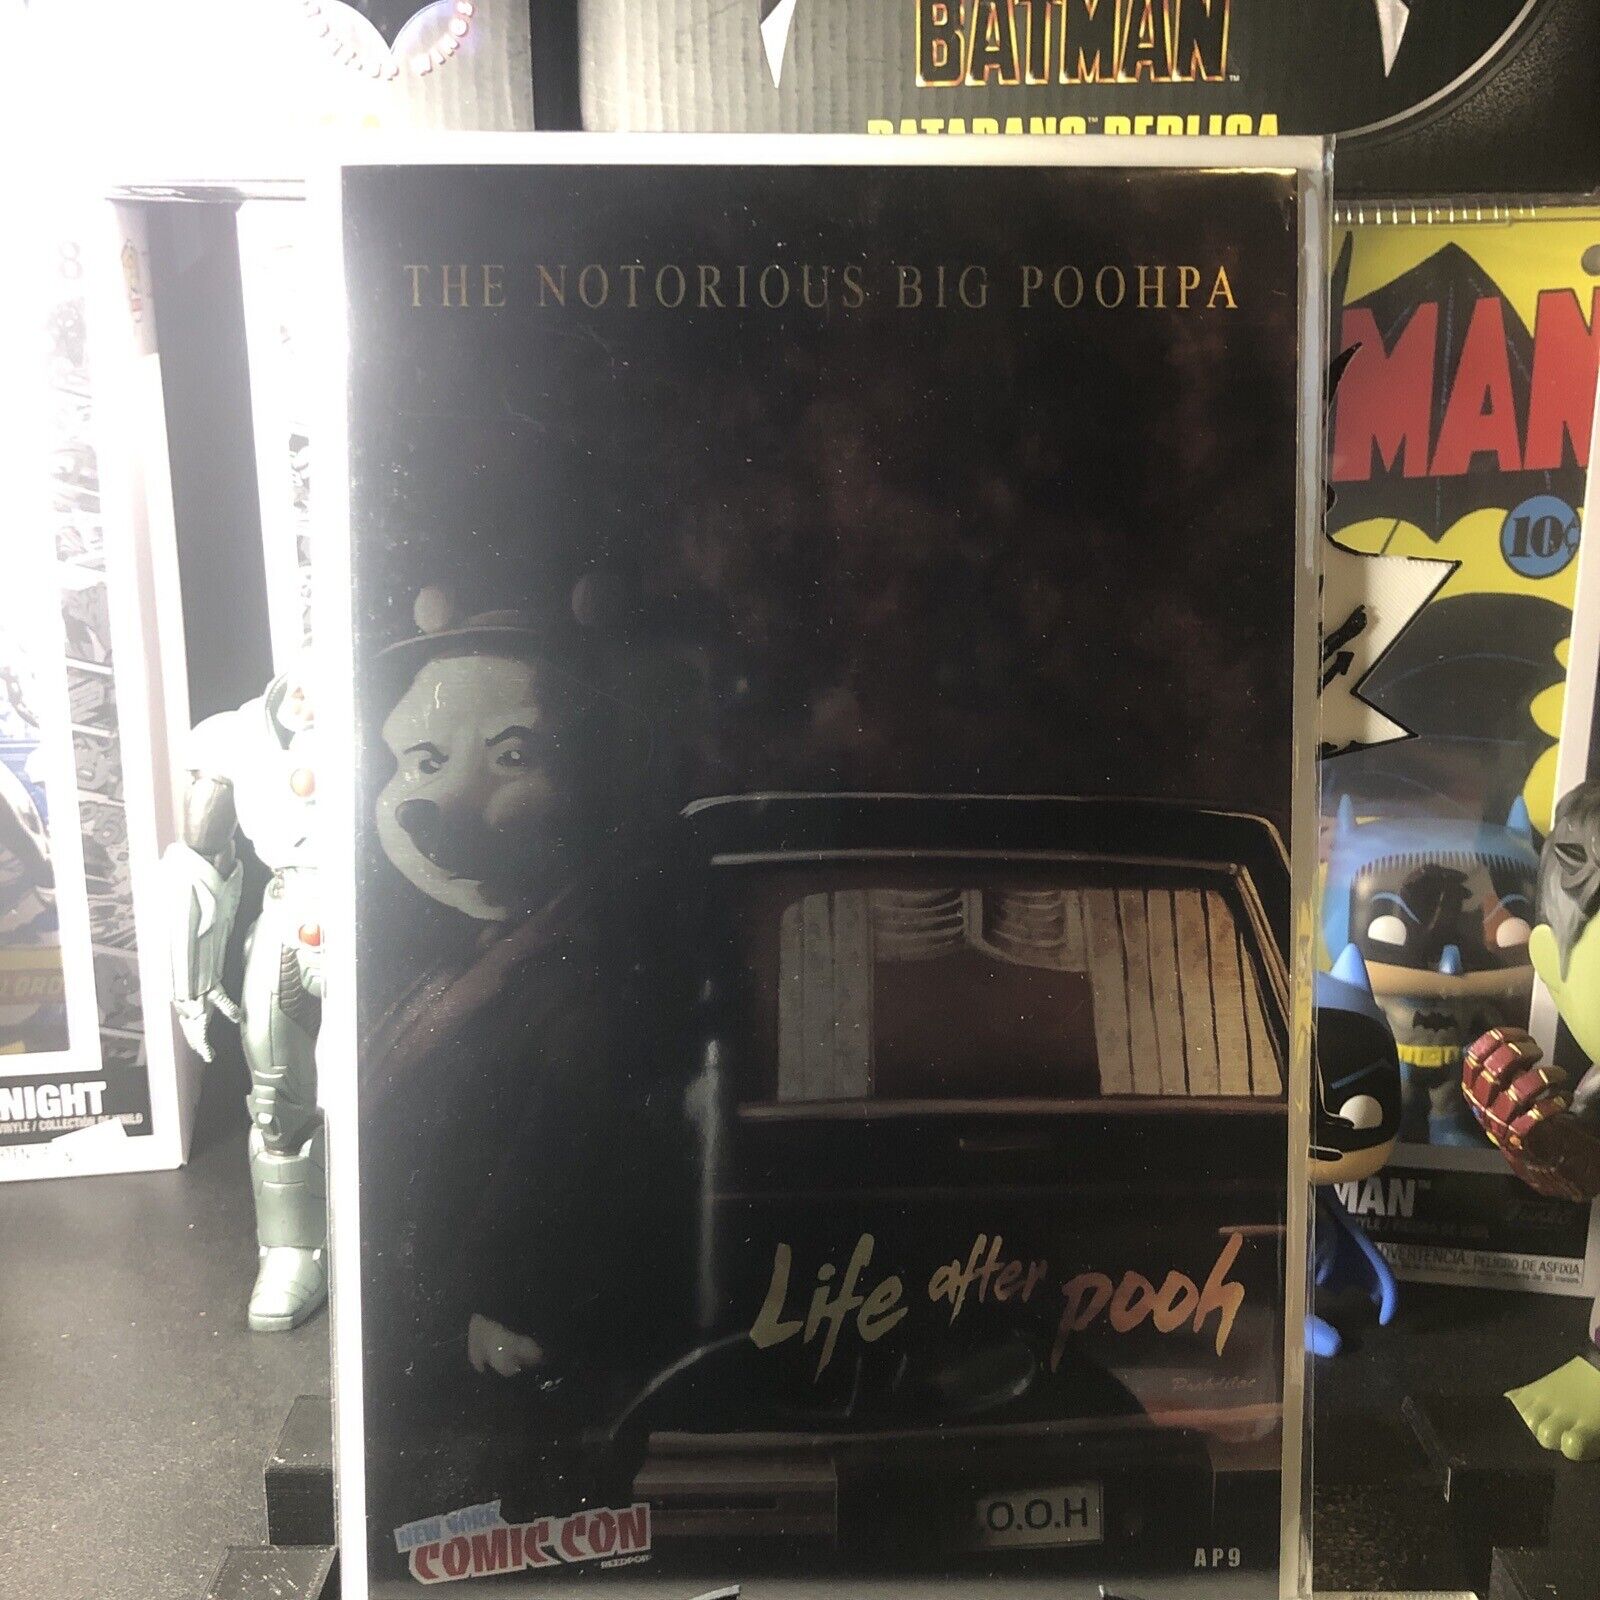 Do You Pooh - The Notorious Big Poohpa - Life After Death Homage - AP9 NYCC ‘22